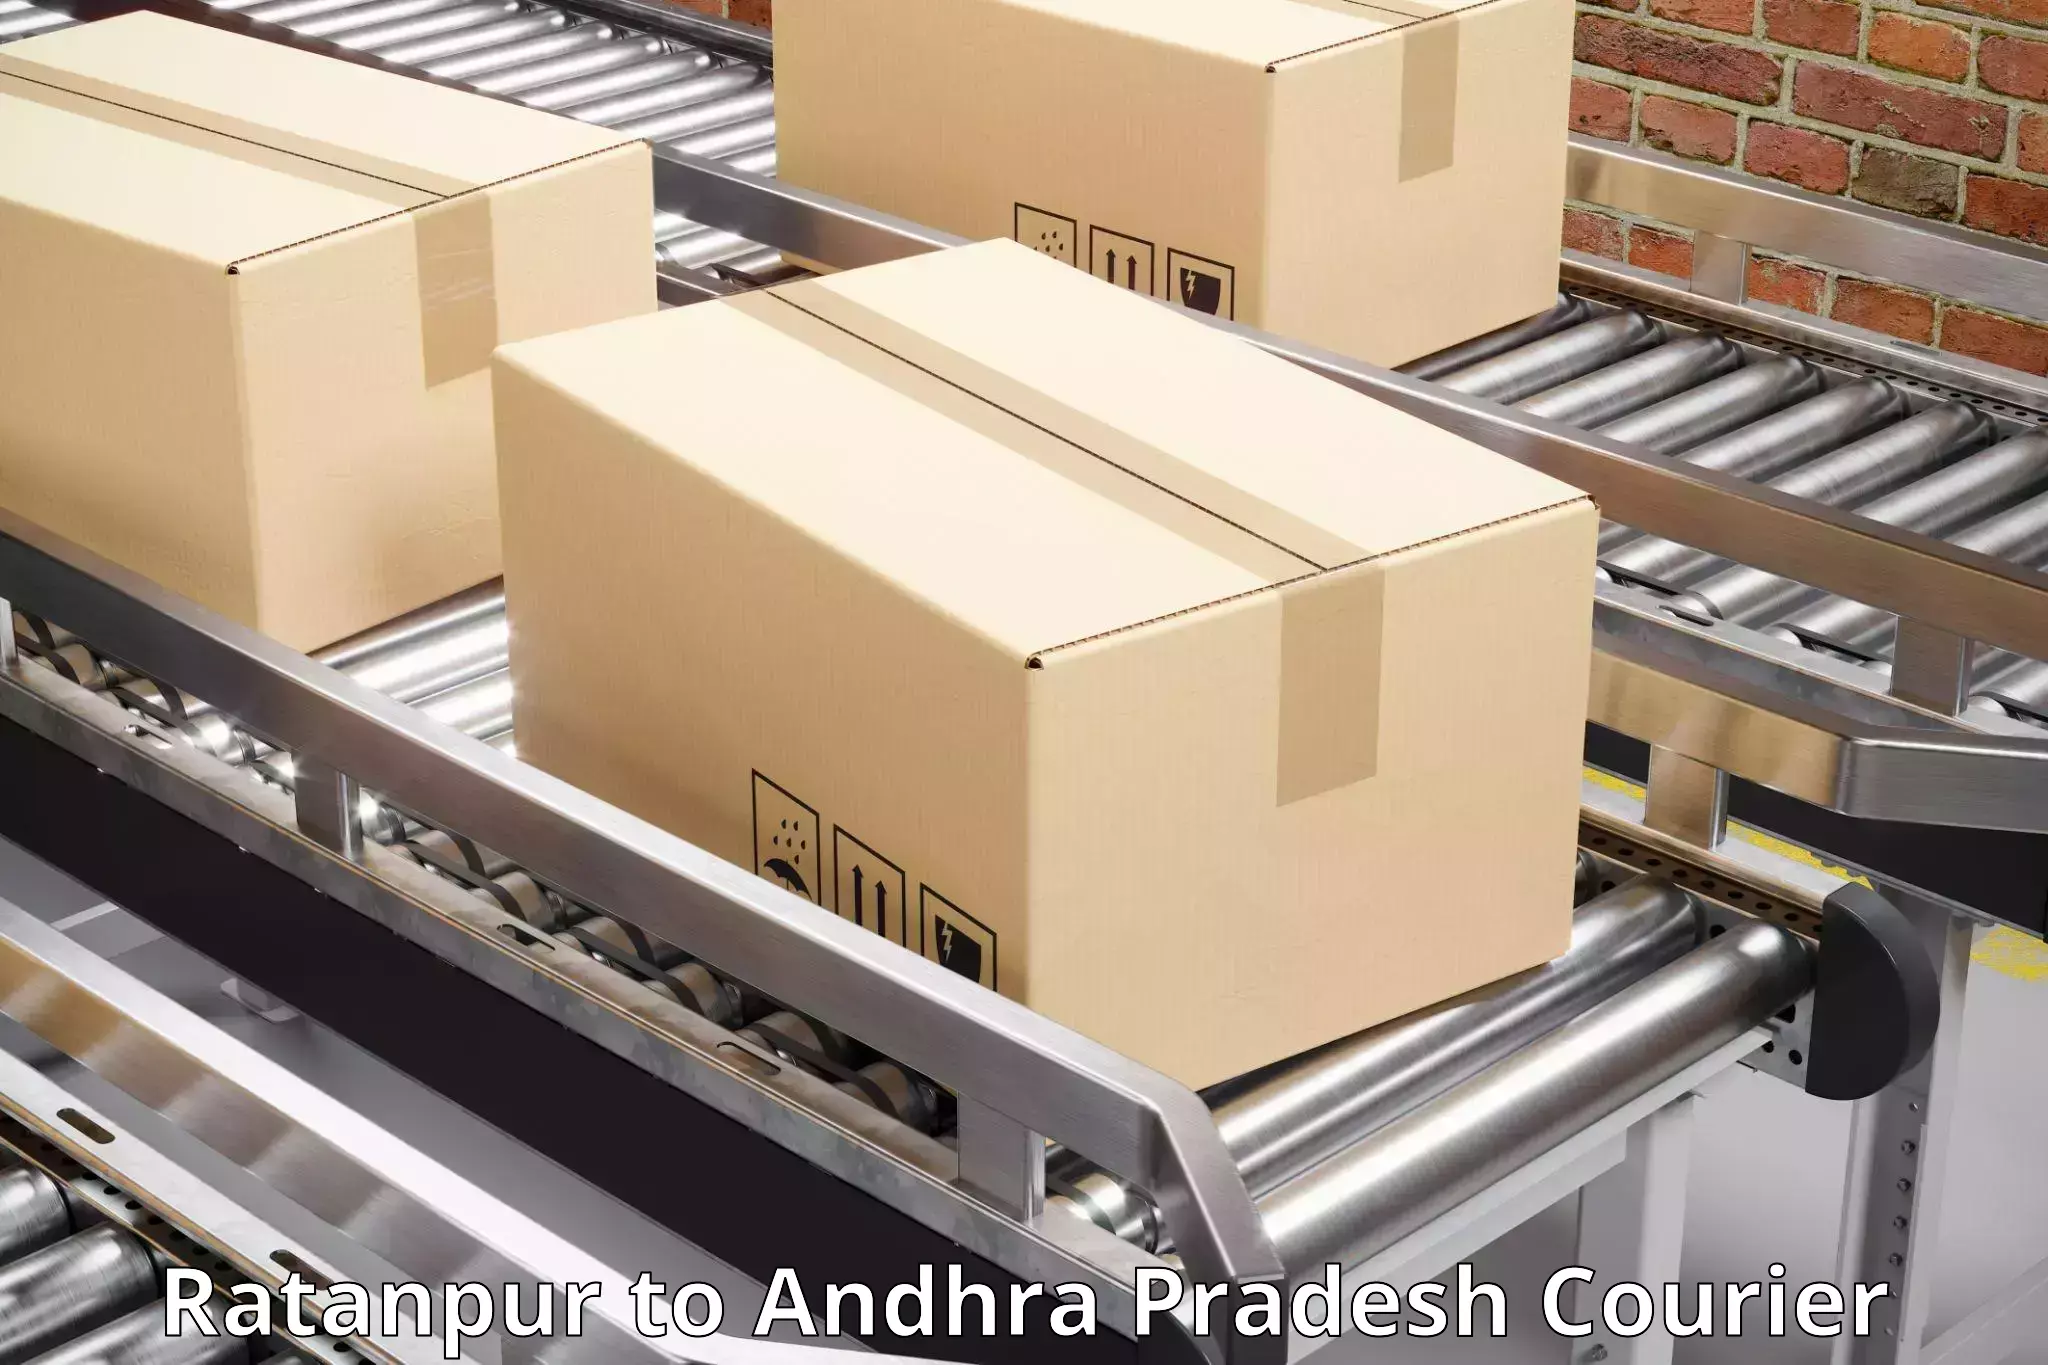 Business delivery service in Ratanpur to Samarlakota